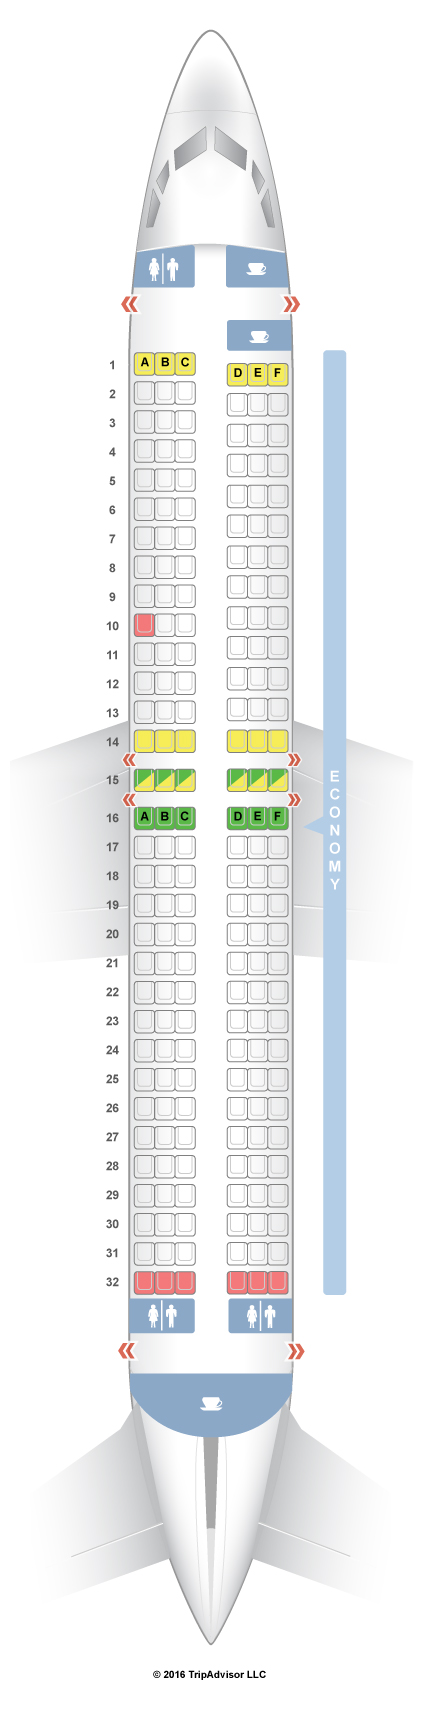 Ka Seating Chart With Seat Numbers